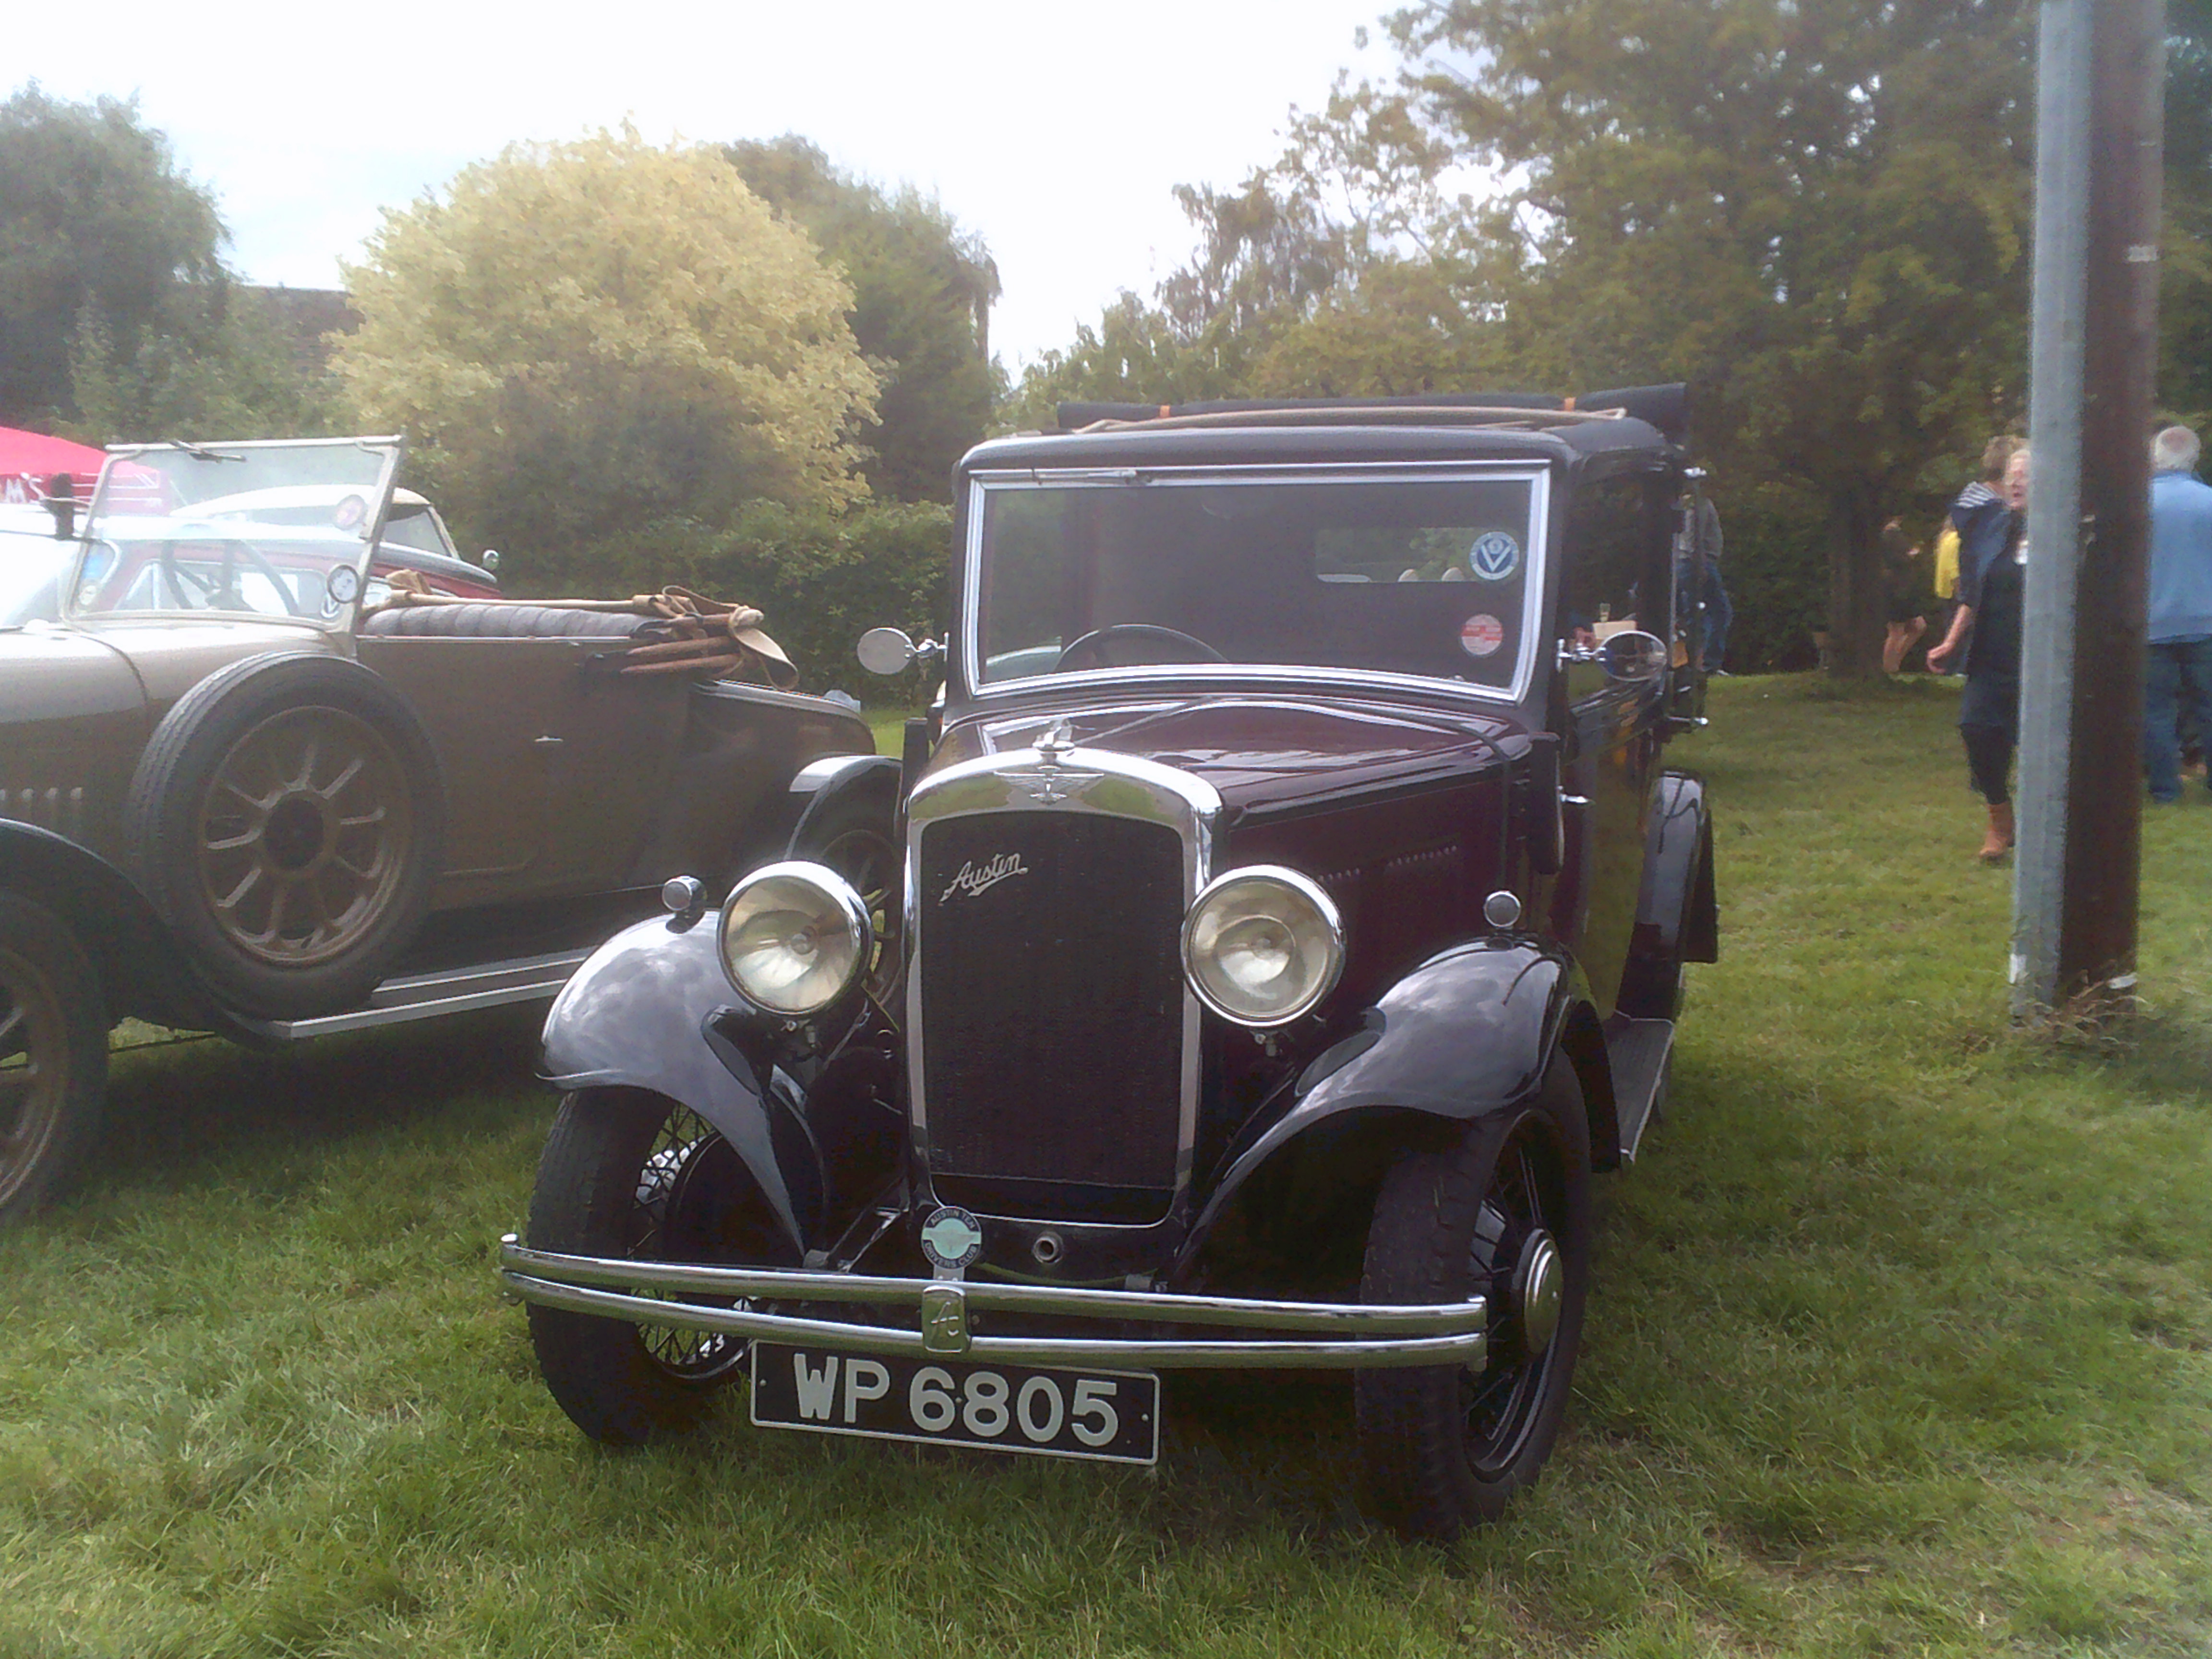 Old car at the Willersey Show